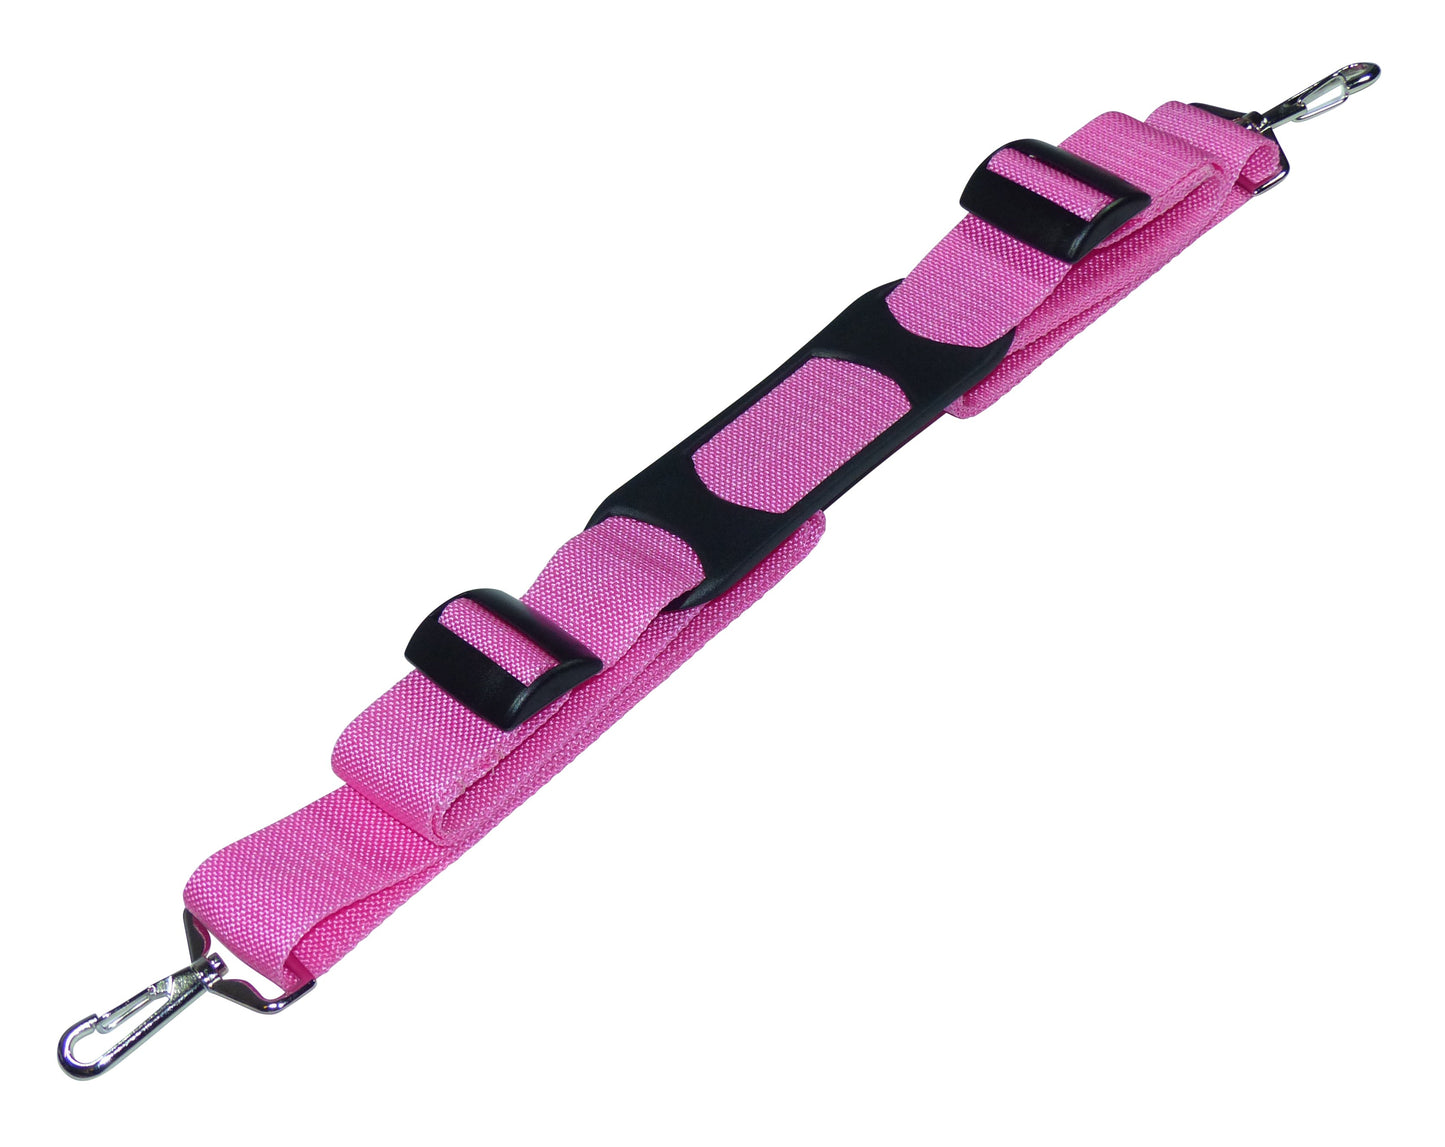 38mm Bag Strap with Metal Buckles and Shoulder Pad, 150cm in pink